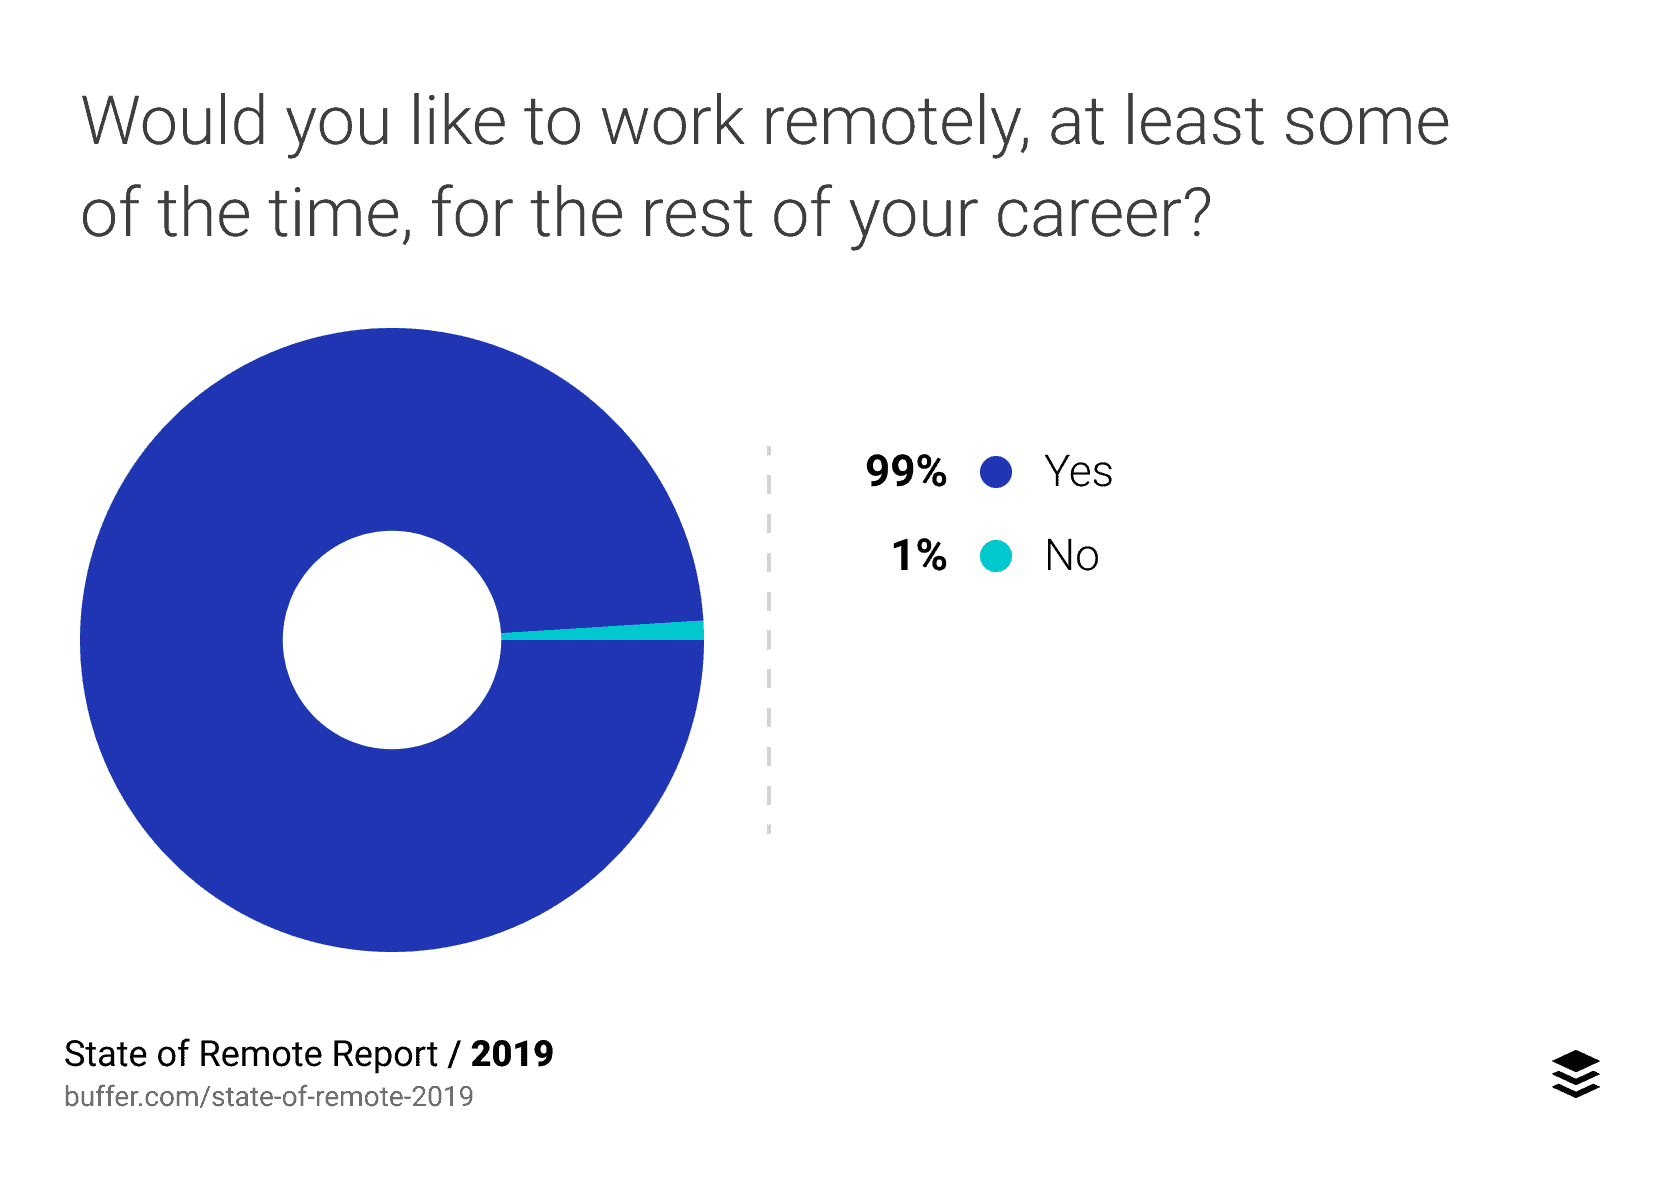 Number of people who would like to work remotely